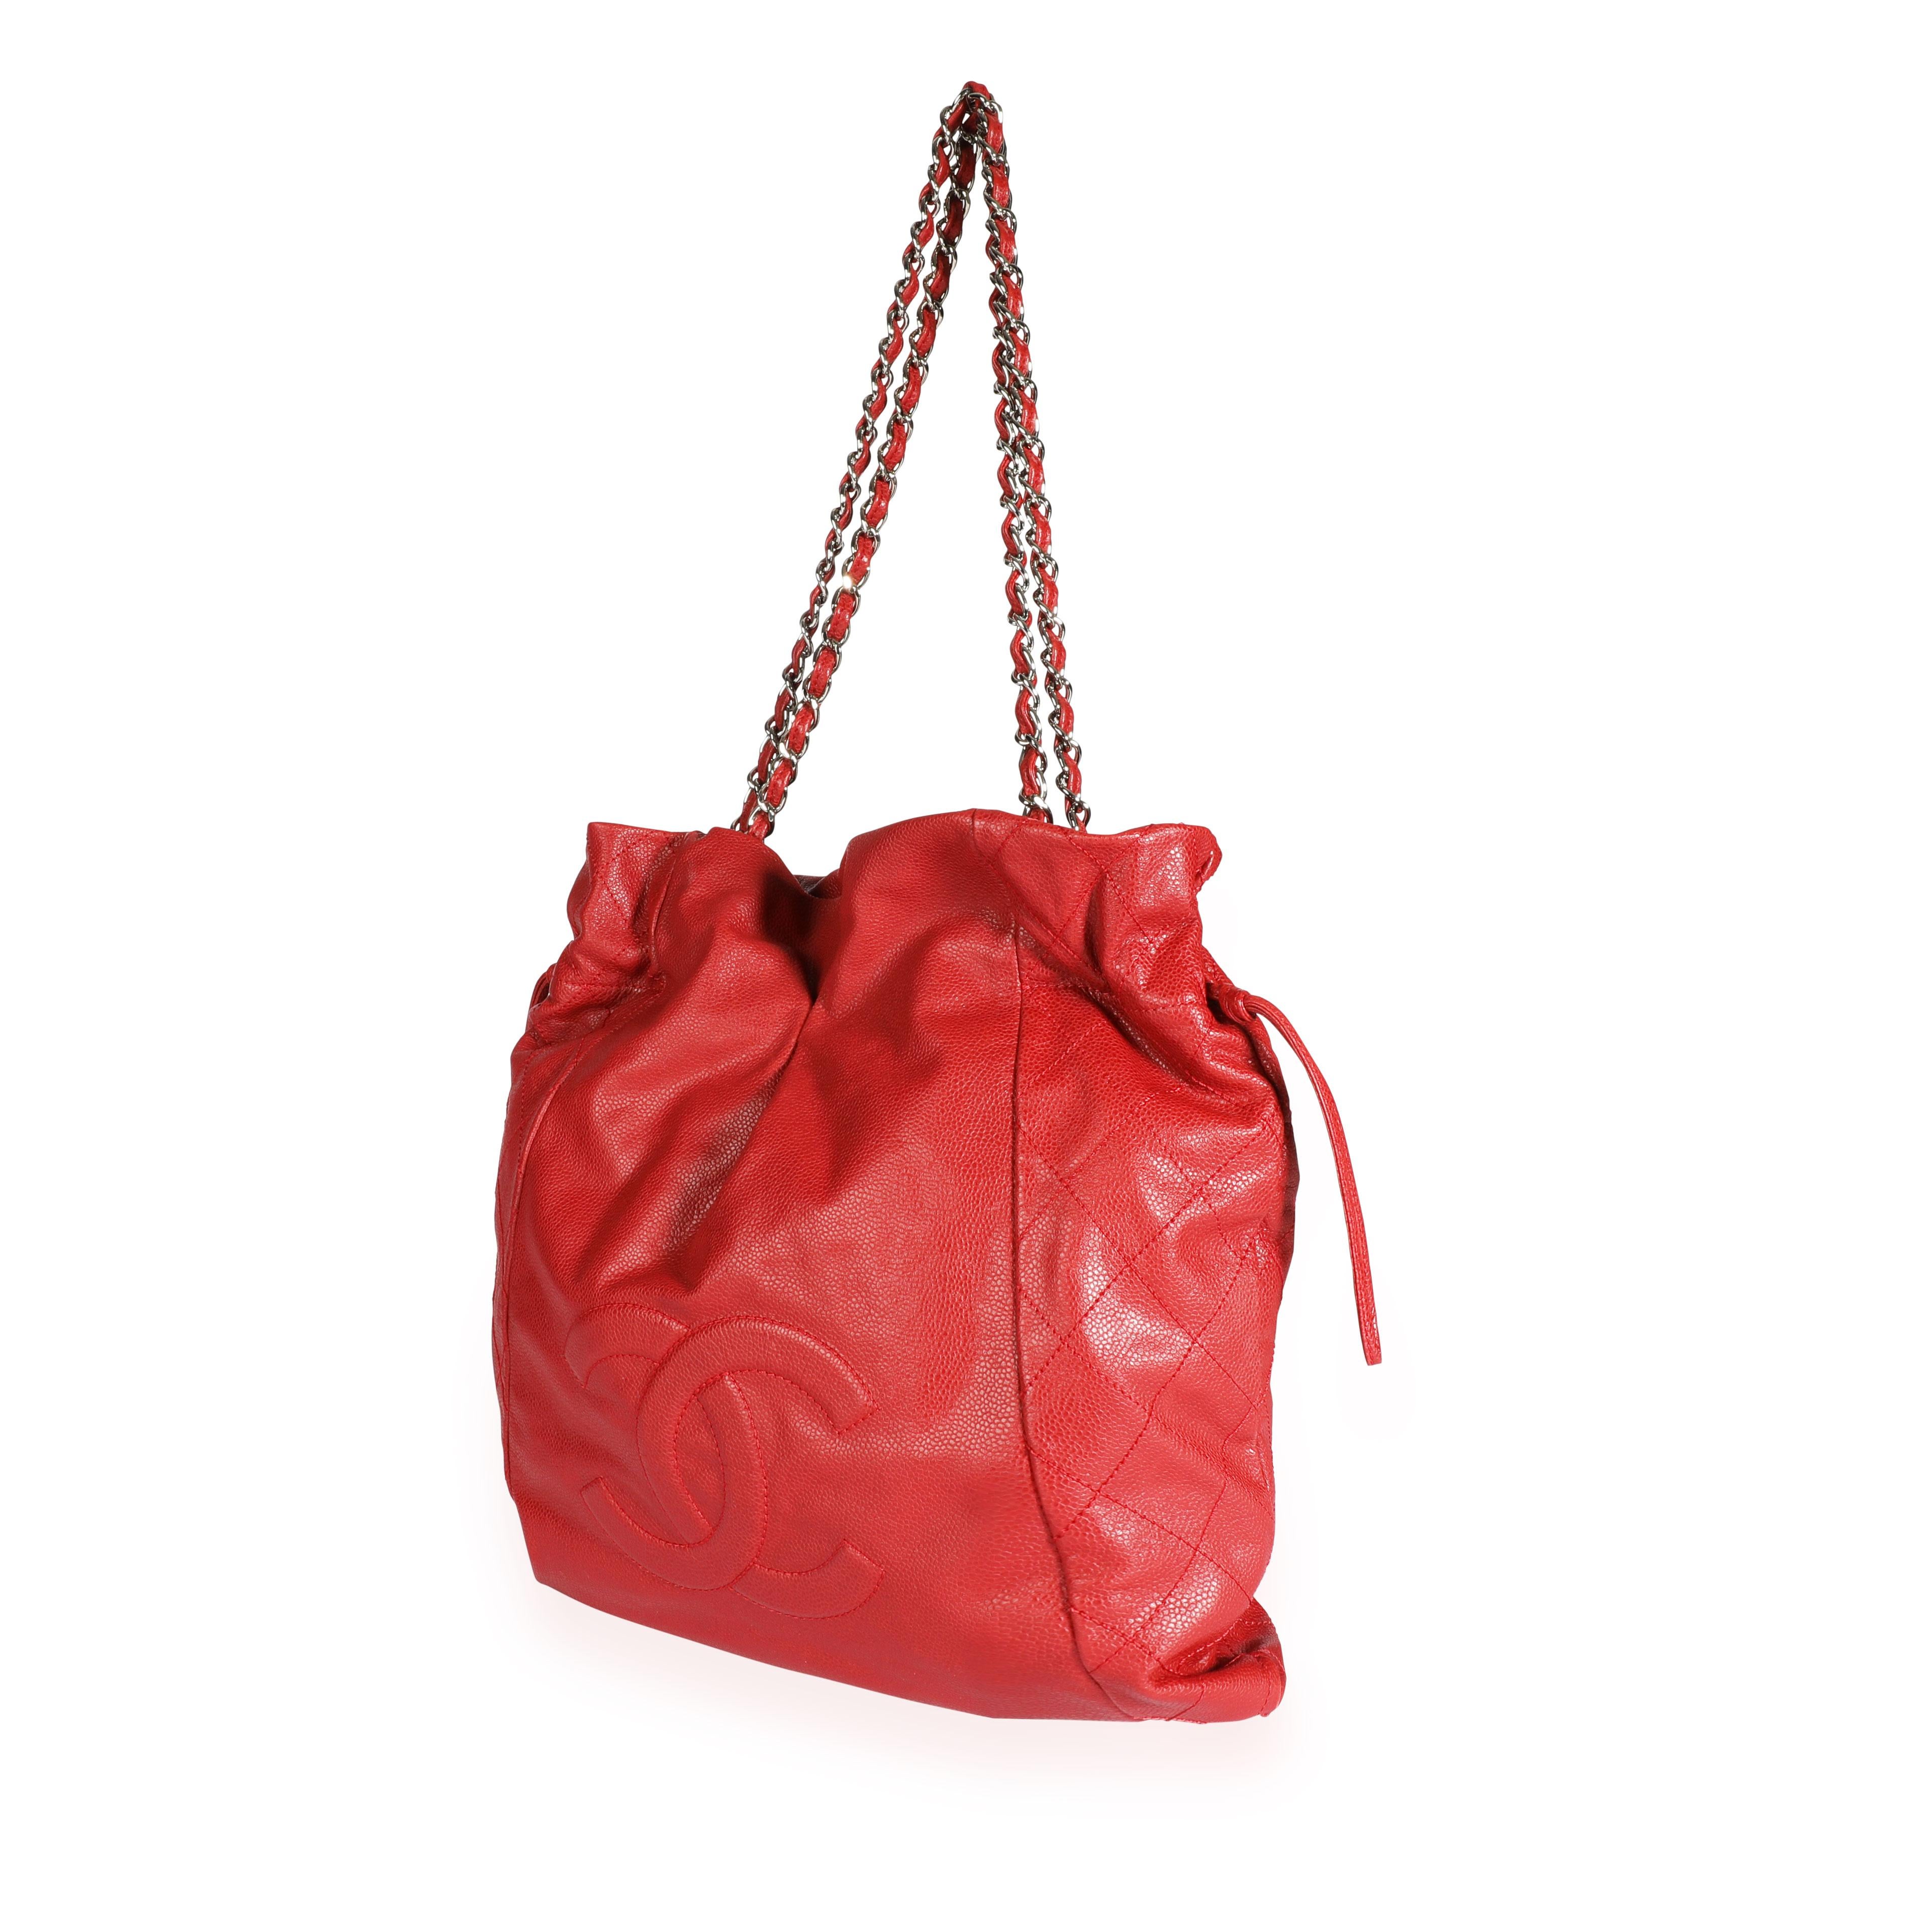 Chanel Red Caviar Leather Timeless Drawstring Tote
SKU: 110241
Condition: Pre-owned (3000)
Handbag Condition: Very Good
Condition Comments: Very Good Condition. Light scuffing to exterior. Pen mark on front.
Brand: Chanel
Model: Timeless Drawstring